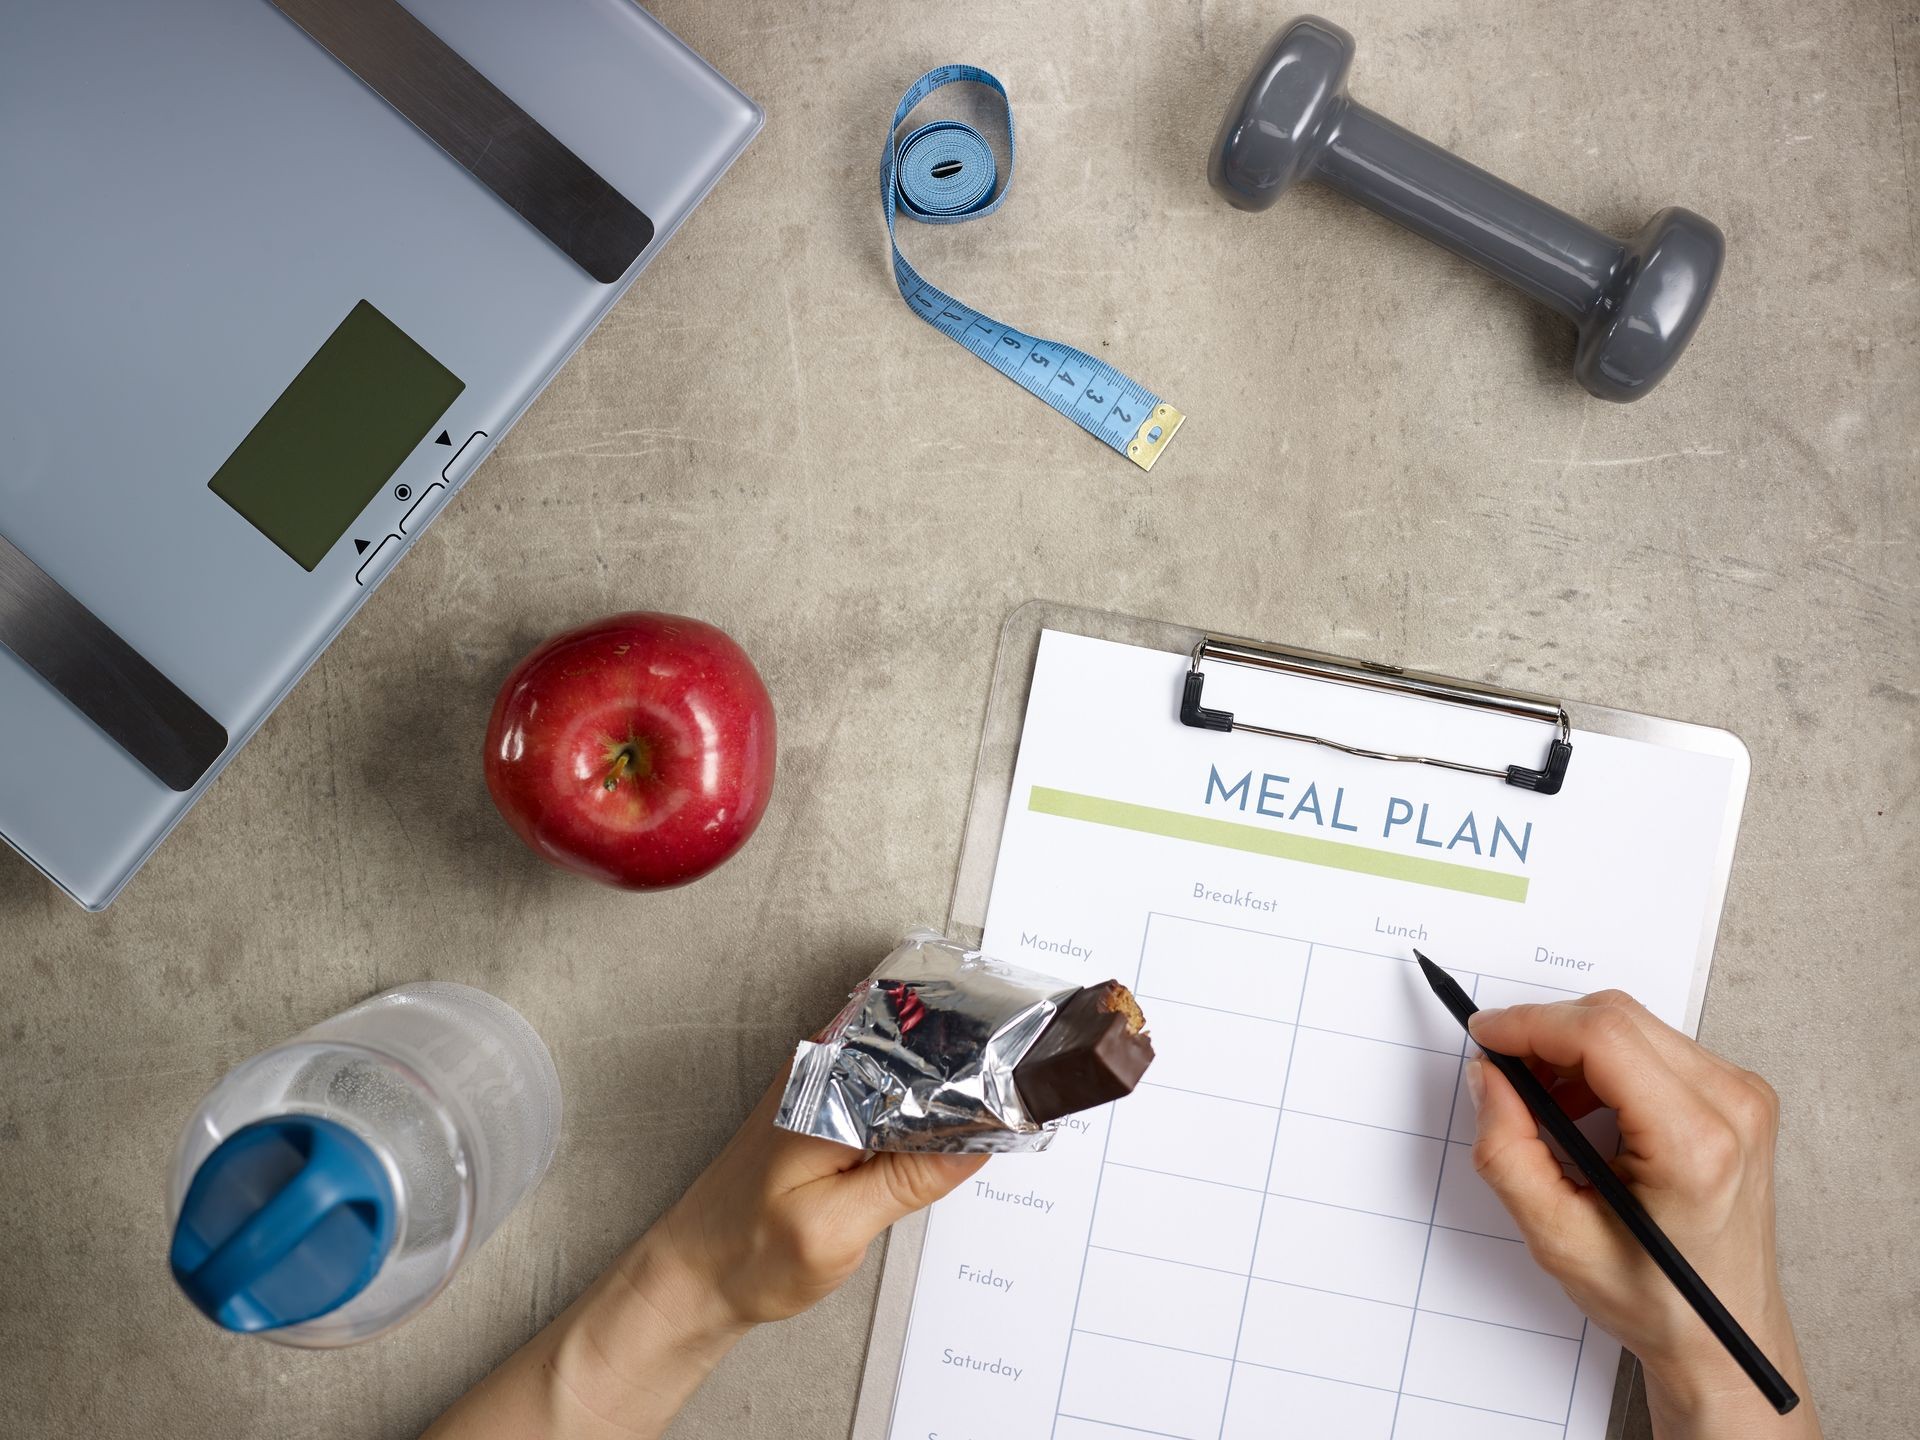 Closeup on weight scales, grey dumbbell, red apple, bottle of water, tape measure laying on the floor and female hands with bitten raw protein bar filling meal plan.